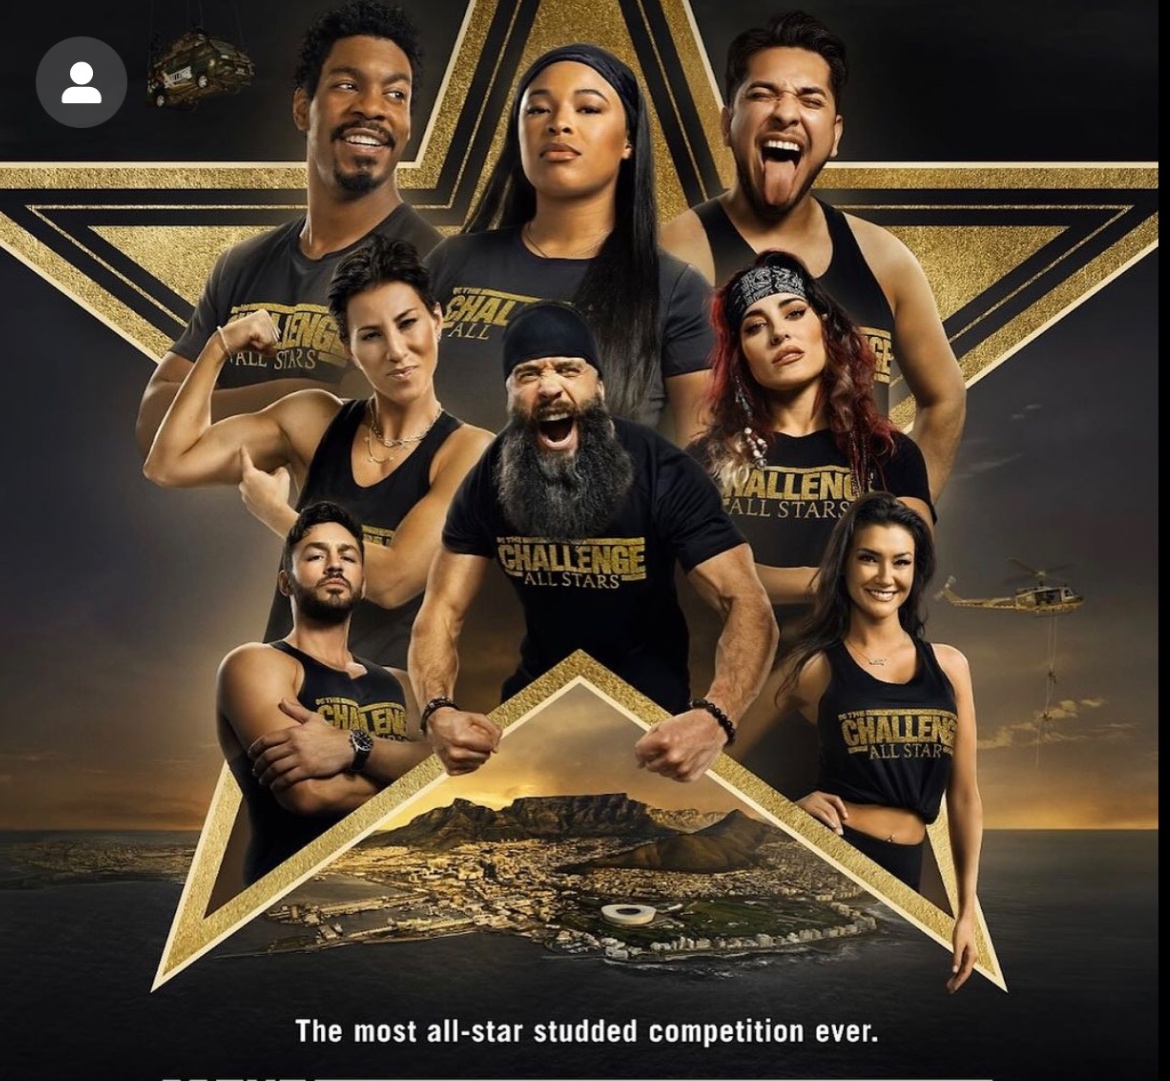 Paramount+ Reveals Premiere Date & Legendary Cast Lineup for New Season of The Challenge: All Stars